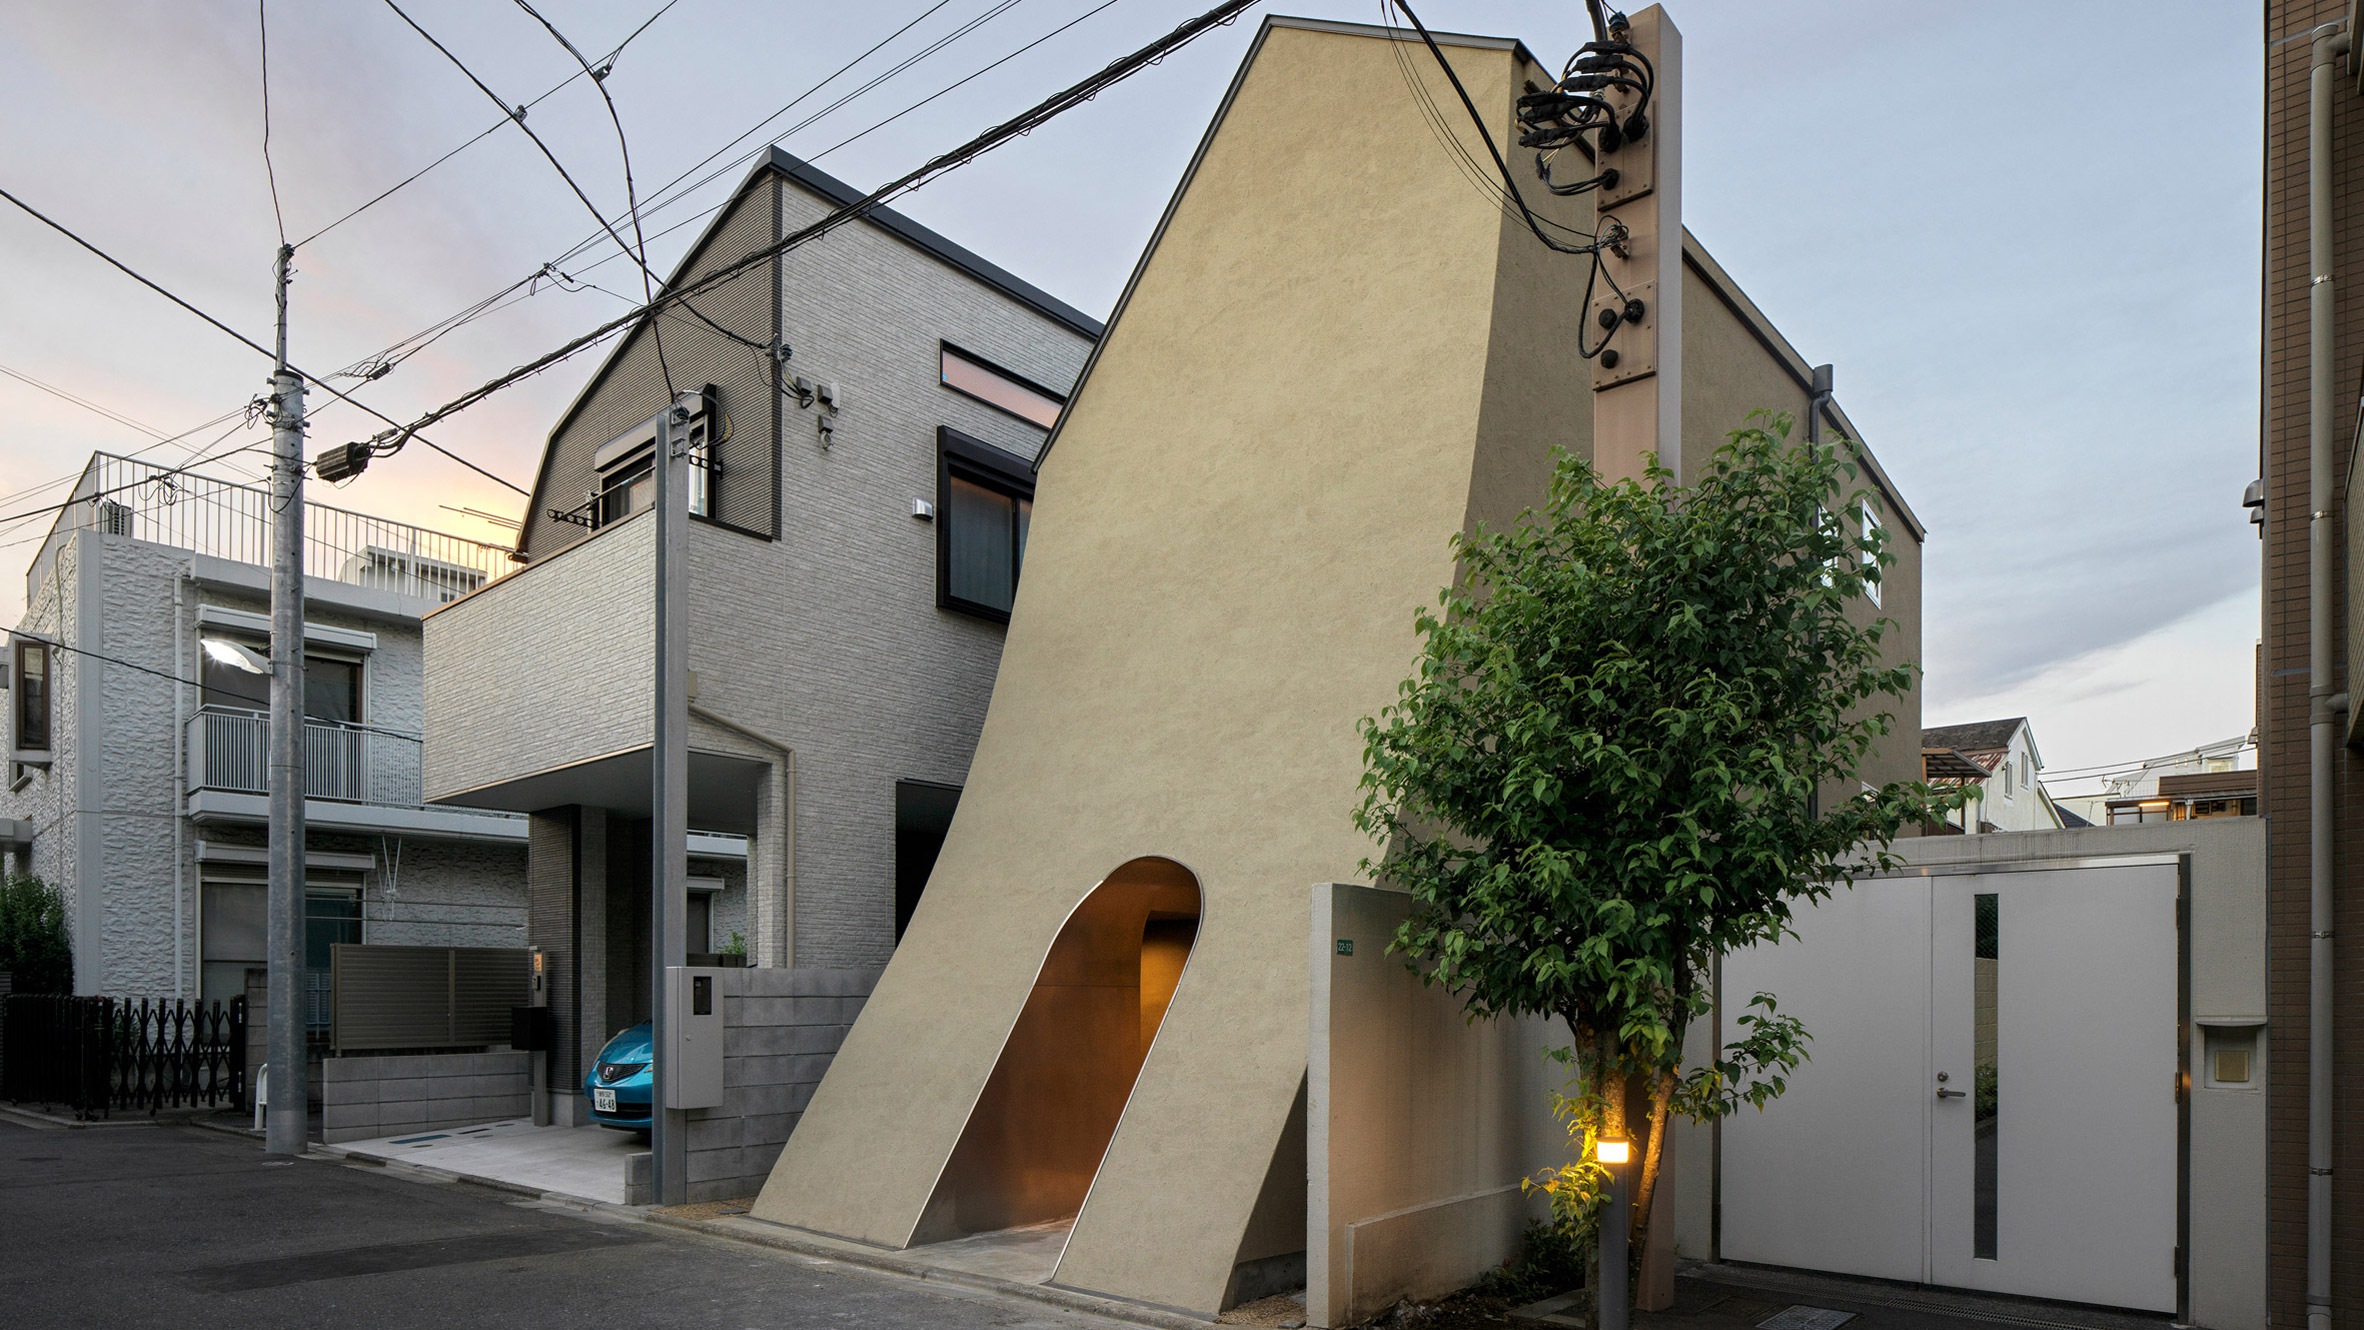 Manga Collector Builds Tokyo Dream House to Store Collection - Blog